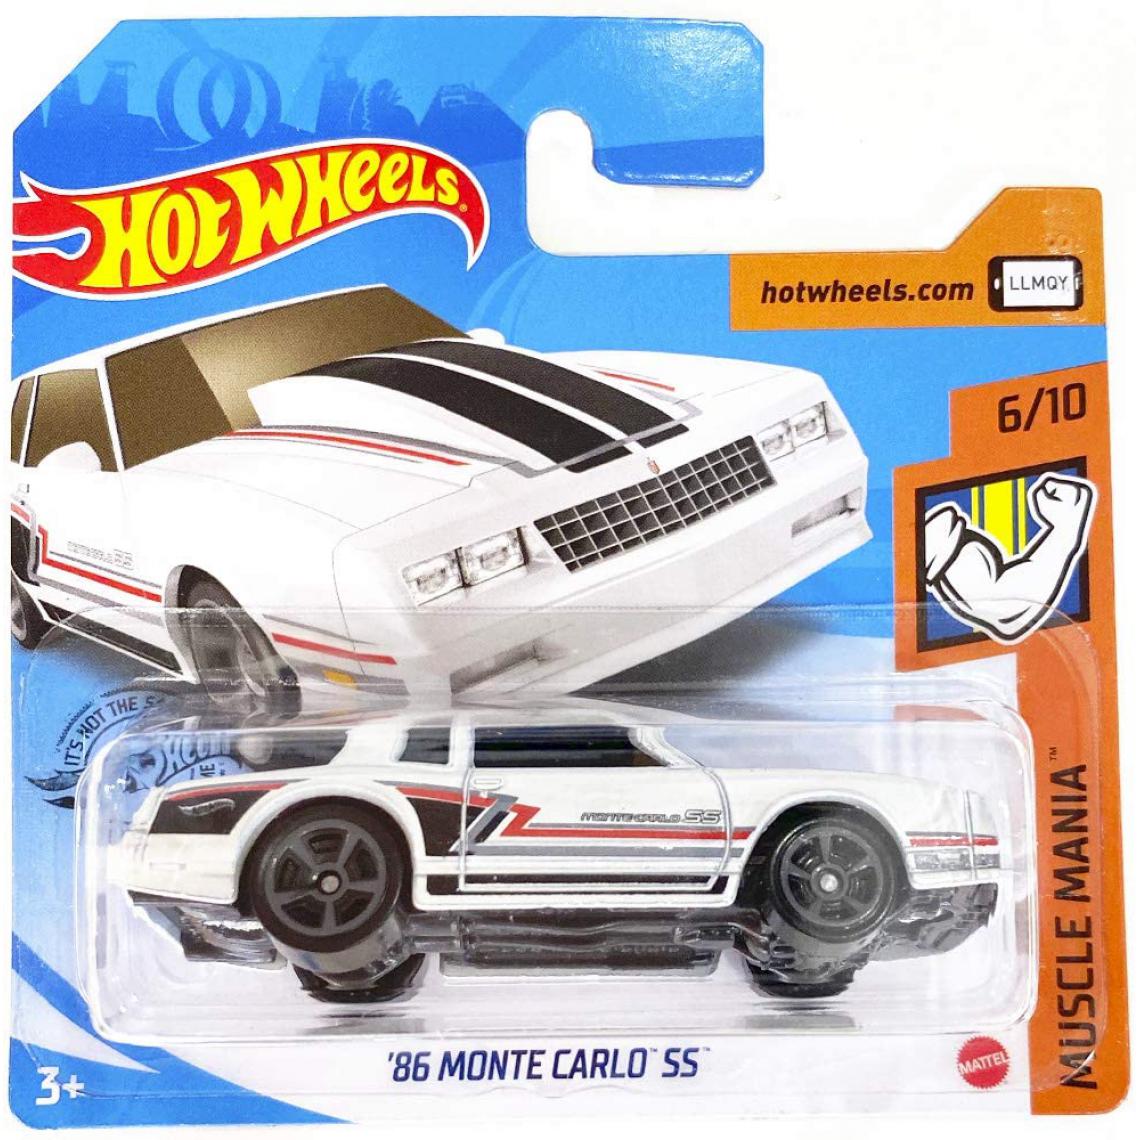 Hot Wheels - véhicule Monte Carlo SS Muscle Mania 6/10 - Voiture de collection miniature